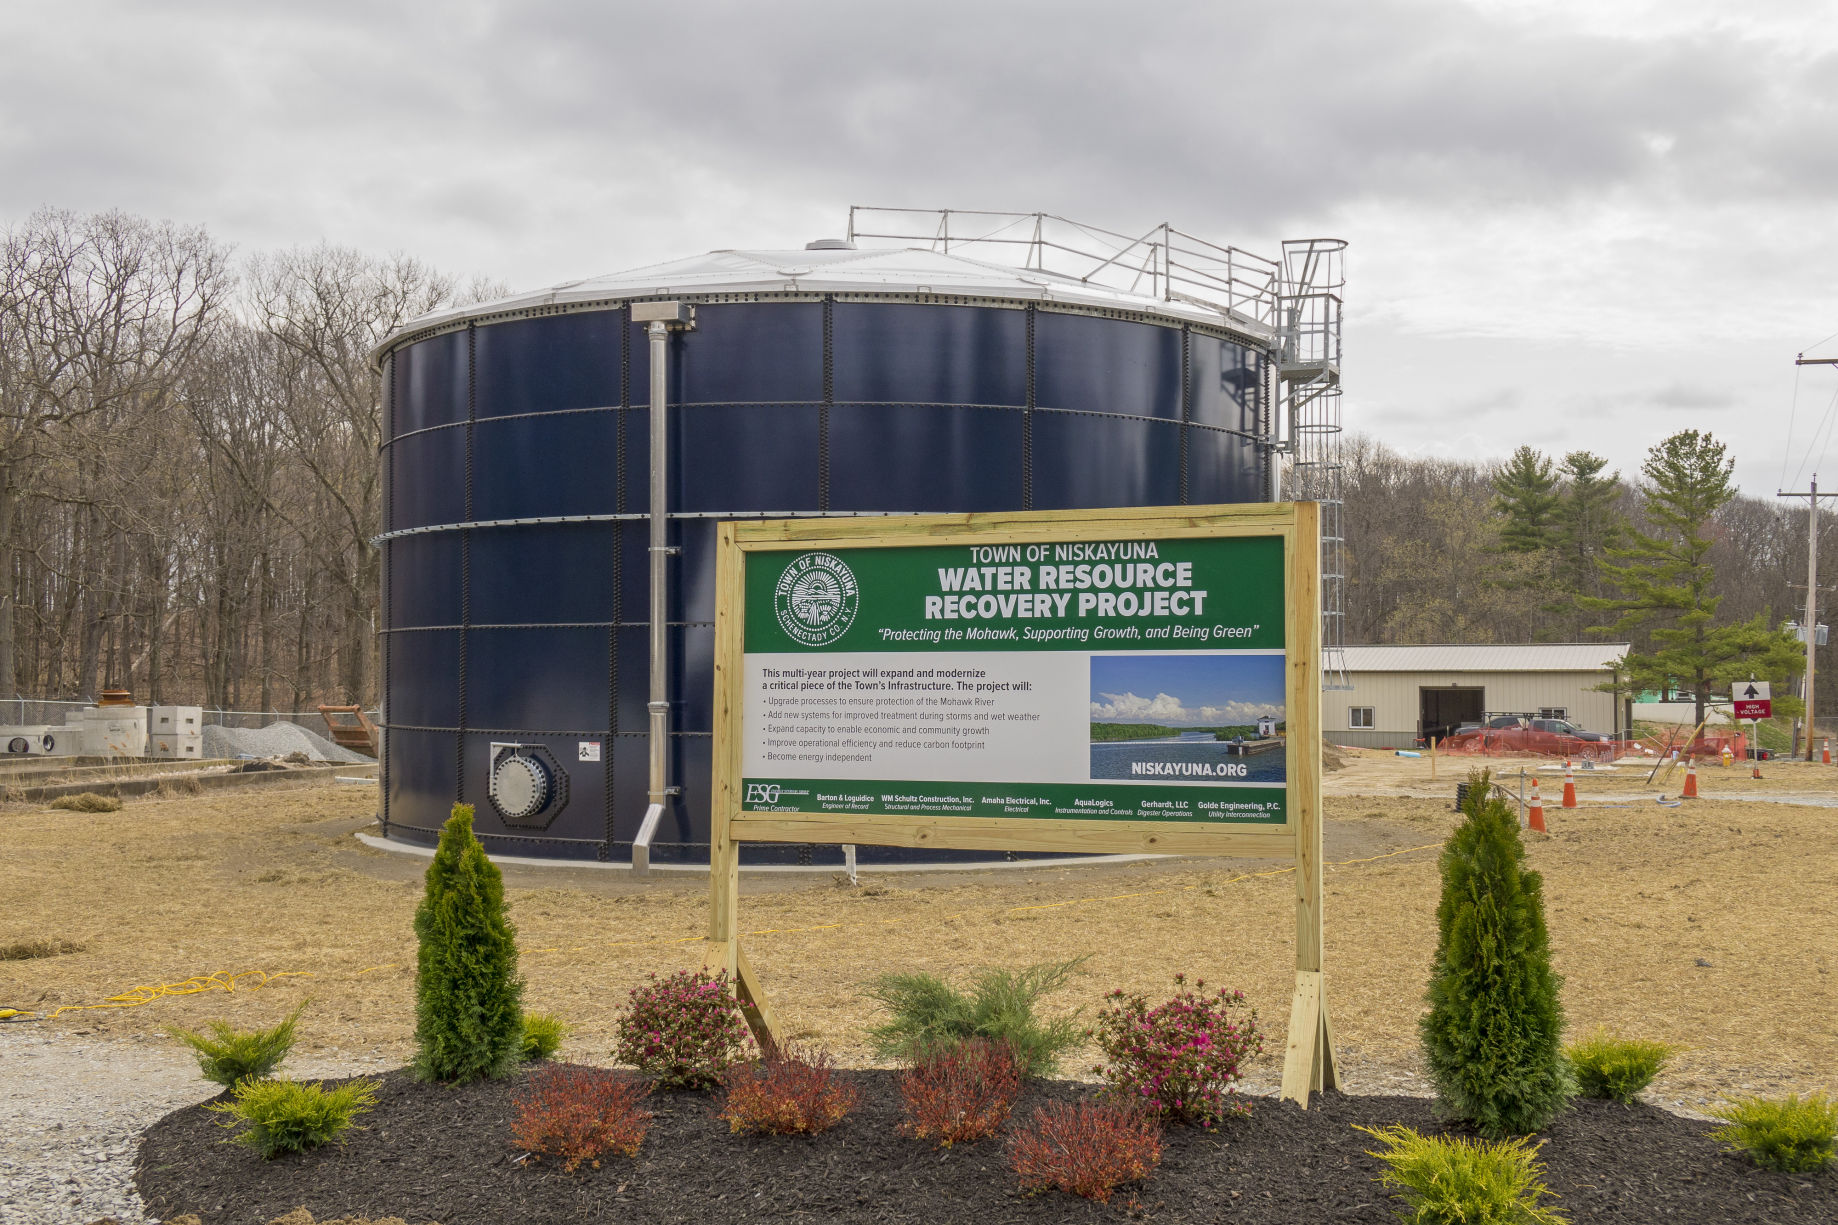 Town of Niskayuna Wastewater Treatment Plant - Tank and Sign